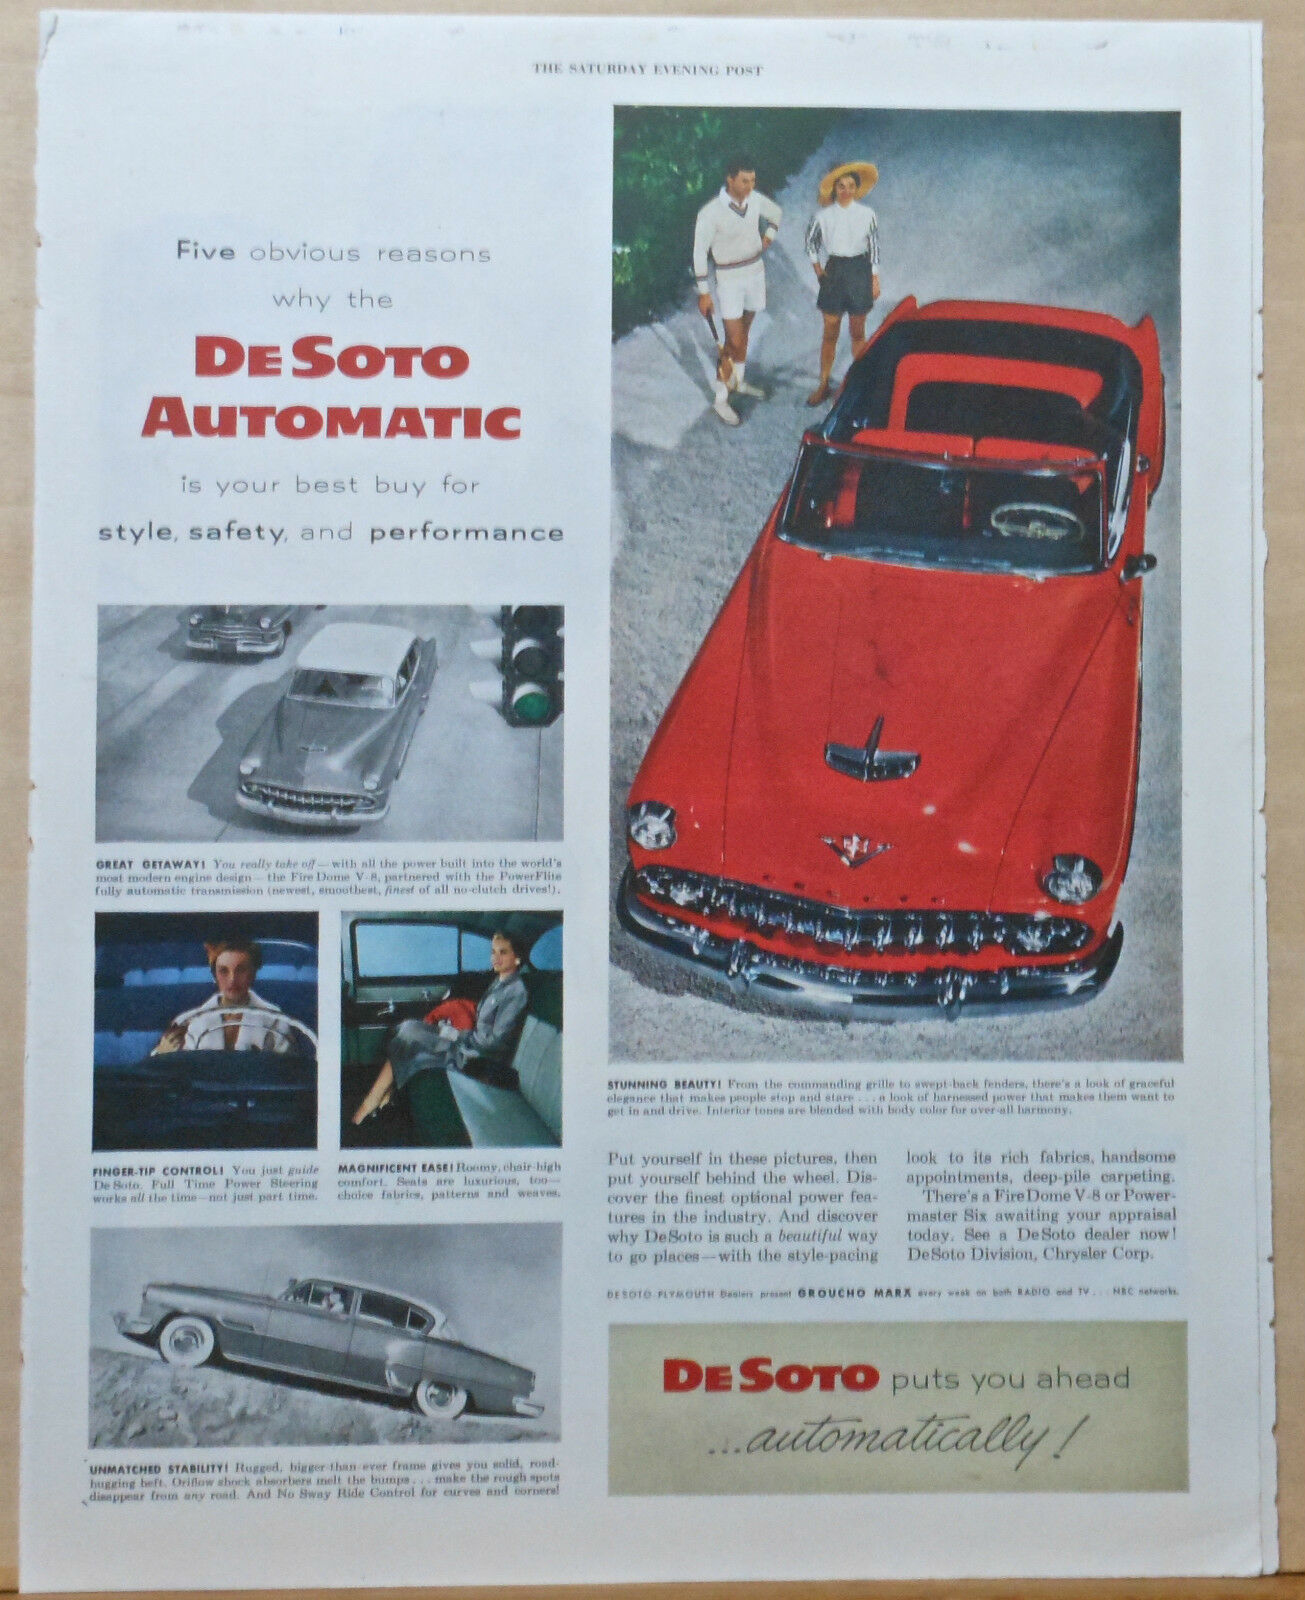 1954 Magazine Ad For Desoto - Fire Dome V-8, Red Convertible, Stunning Beauty